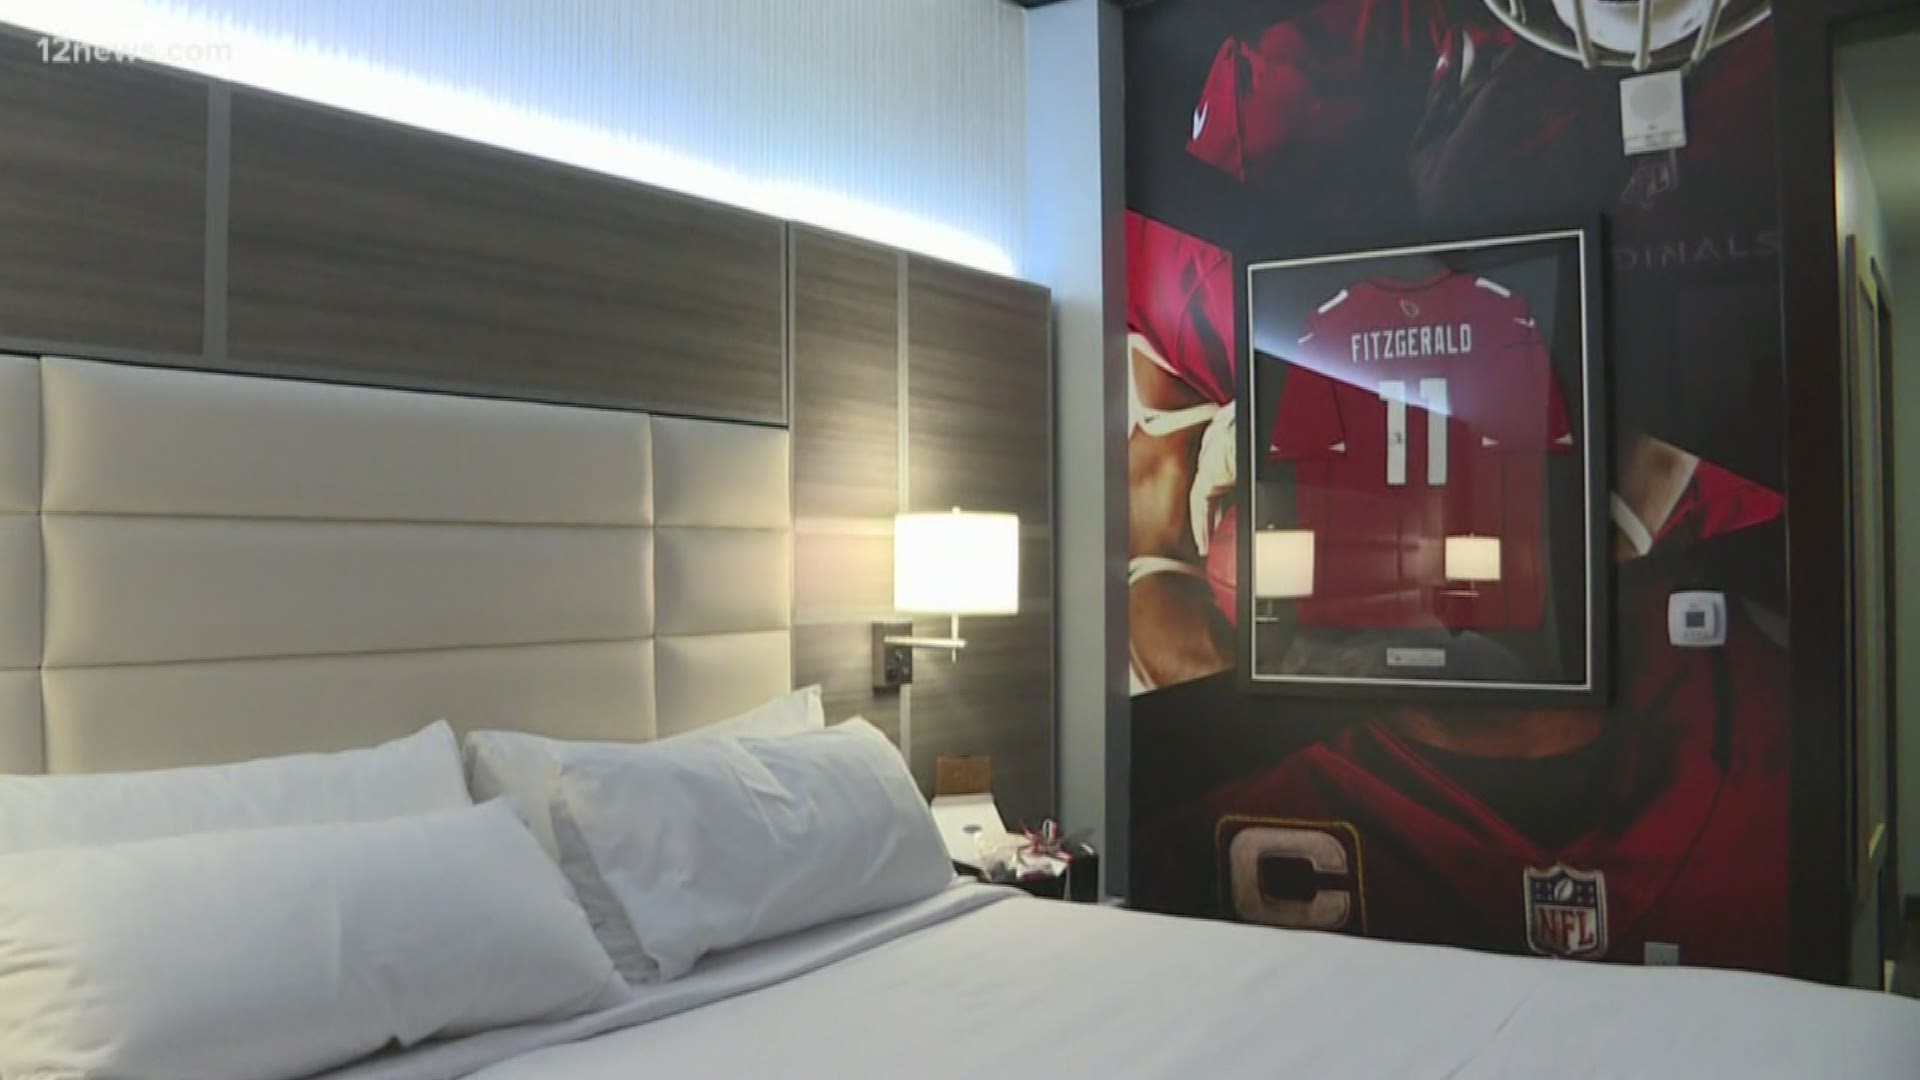 Gila River Hotels and Casino is offering stays in two specially themed Arizona Cardinals fan rooms.  During your stay you will be treated to a Cardinals goodie box.